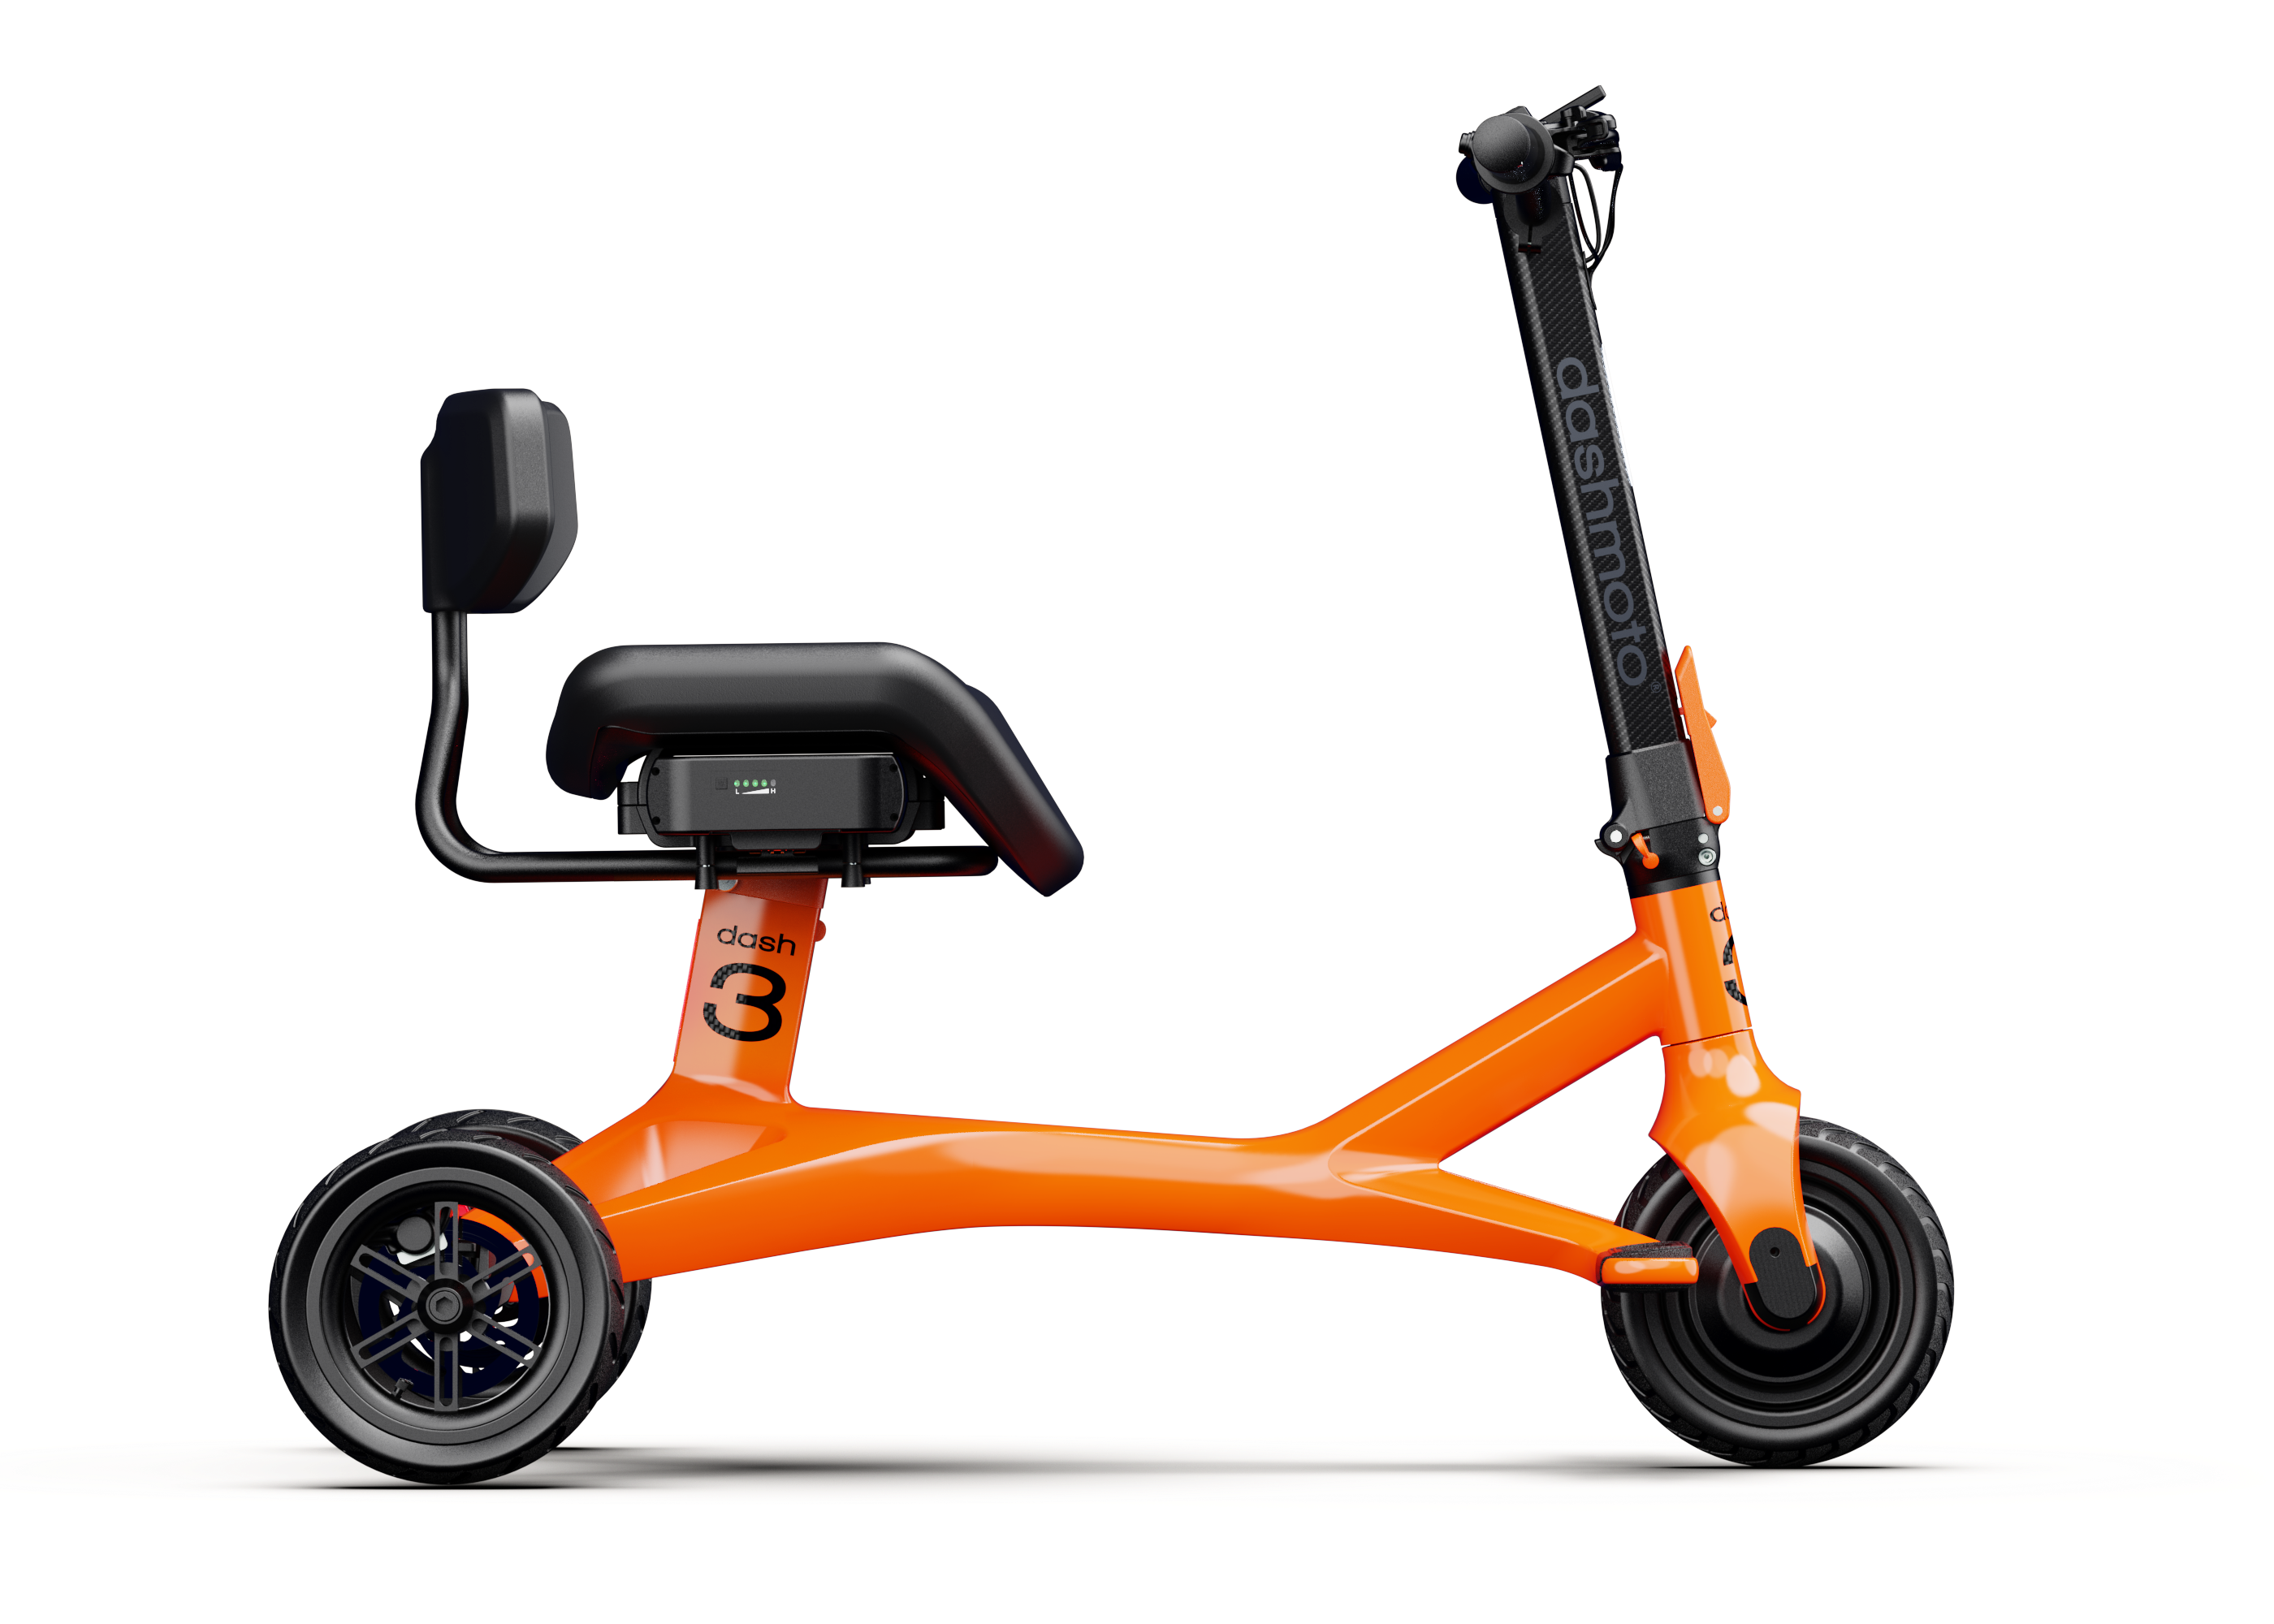 View of the right-hand side of the dashmoto® frame (Senna Orange variant)